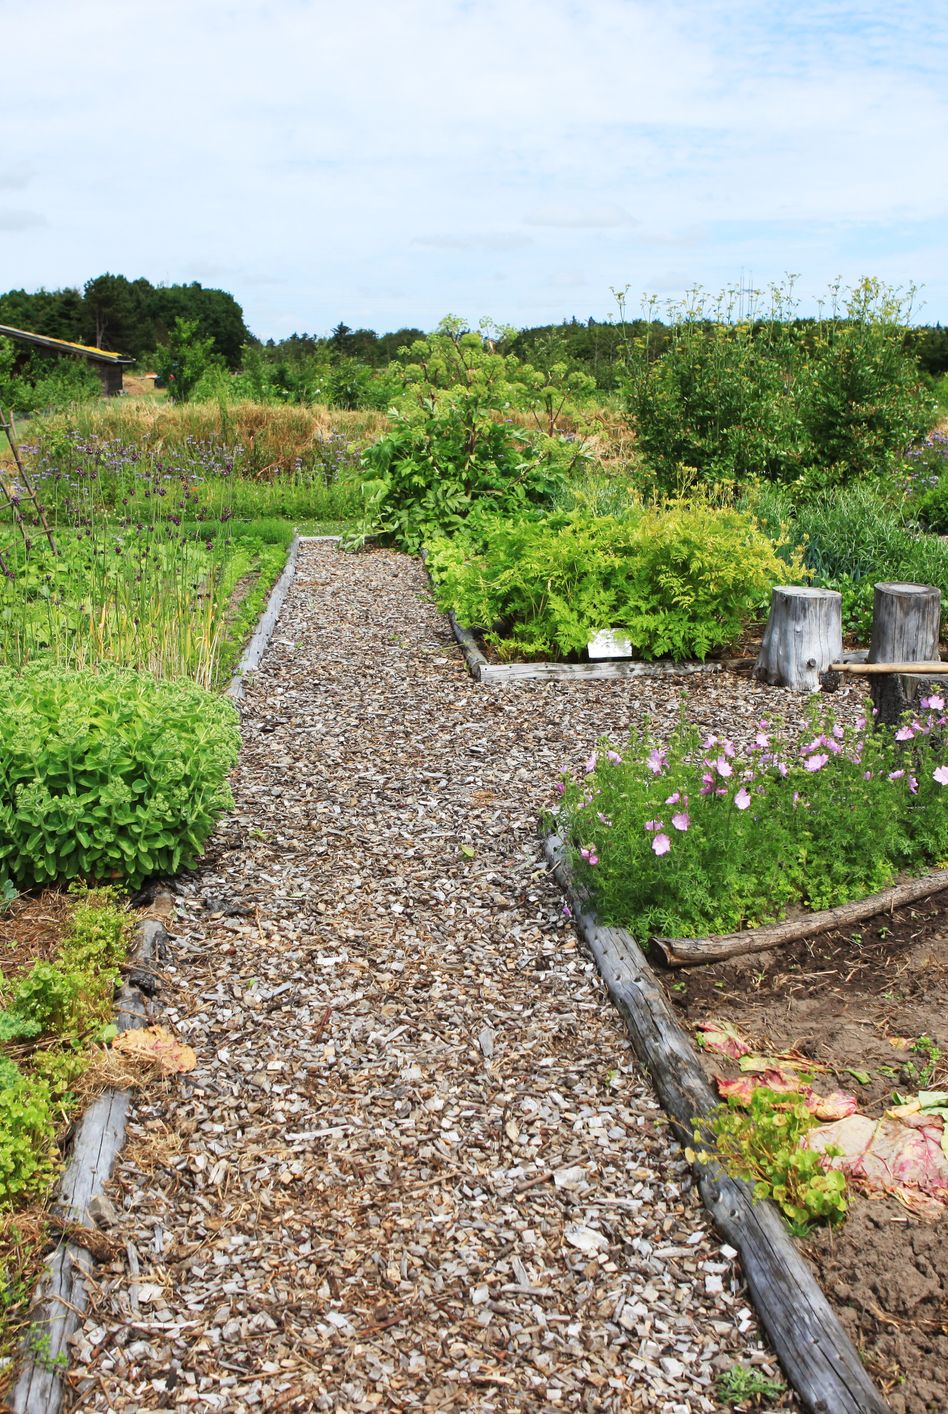 Large rural organic garden with vegetables and flowers